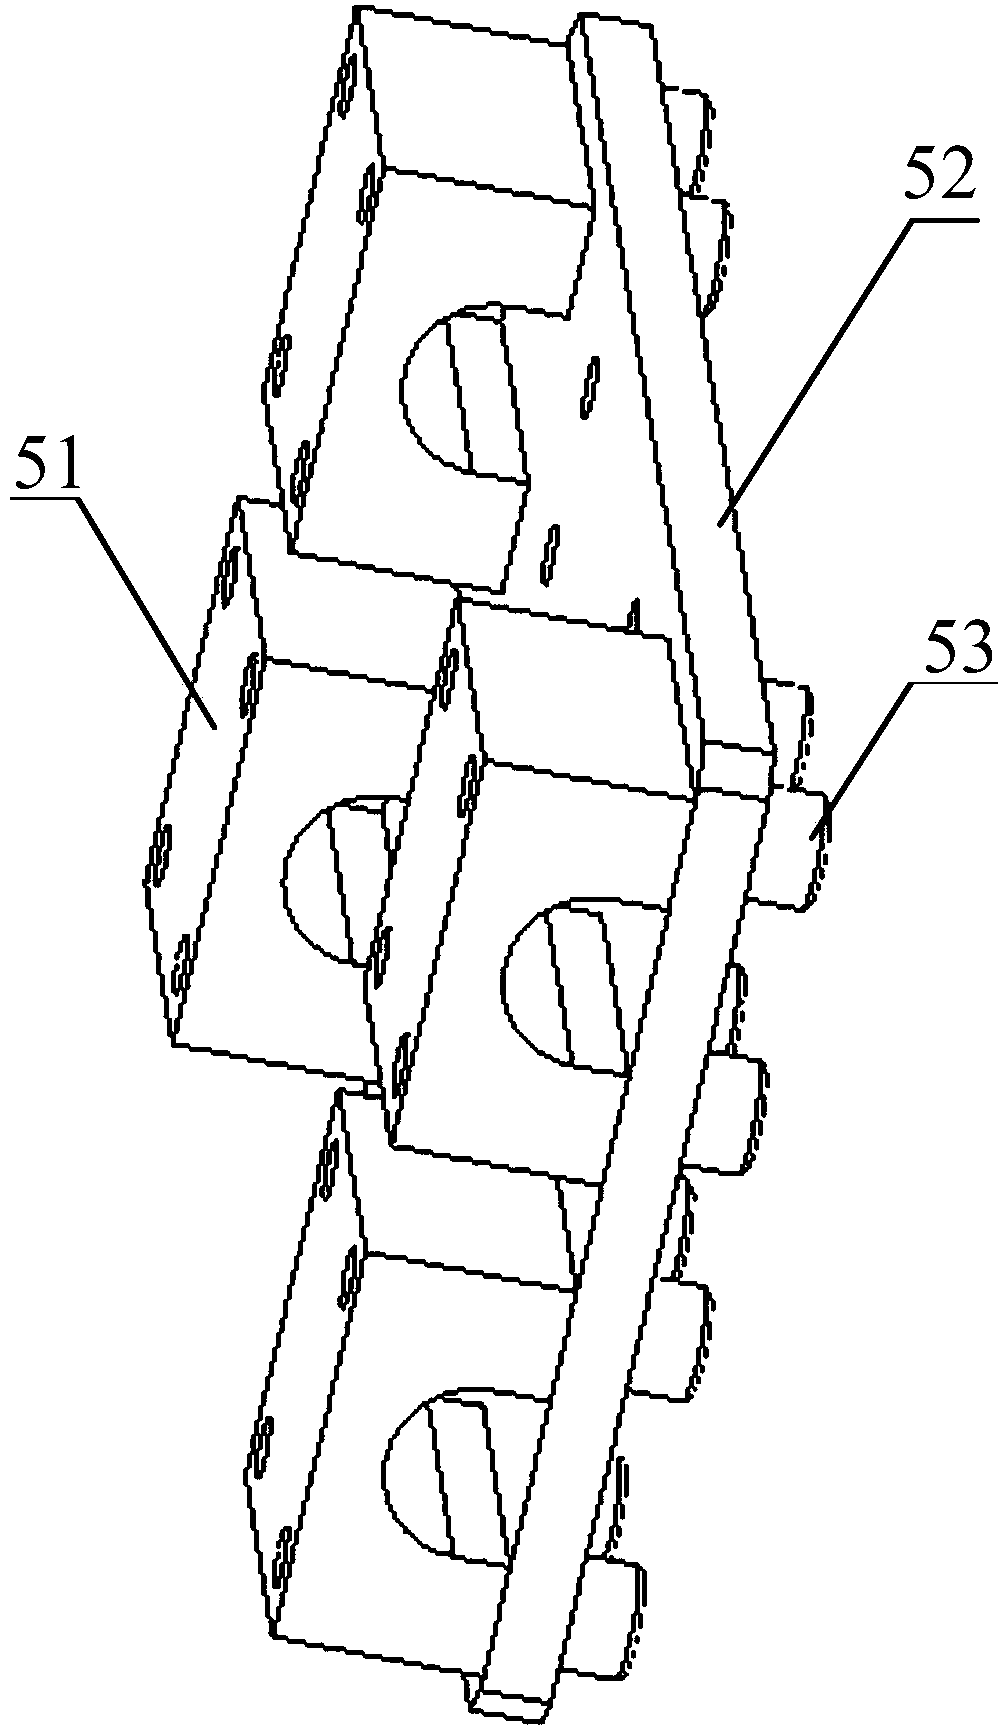 Multi-degree-of-freedom regulation device and spraying system